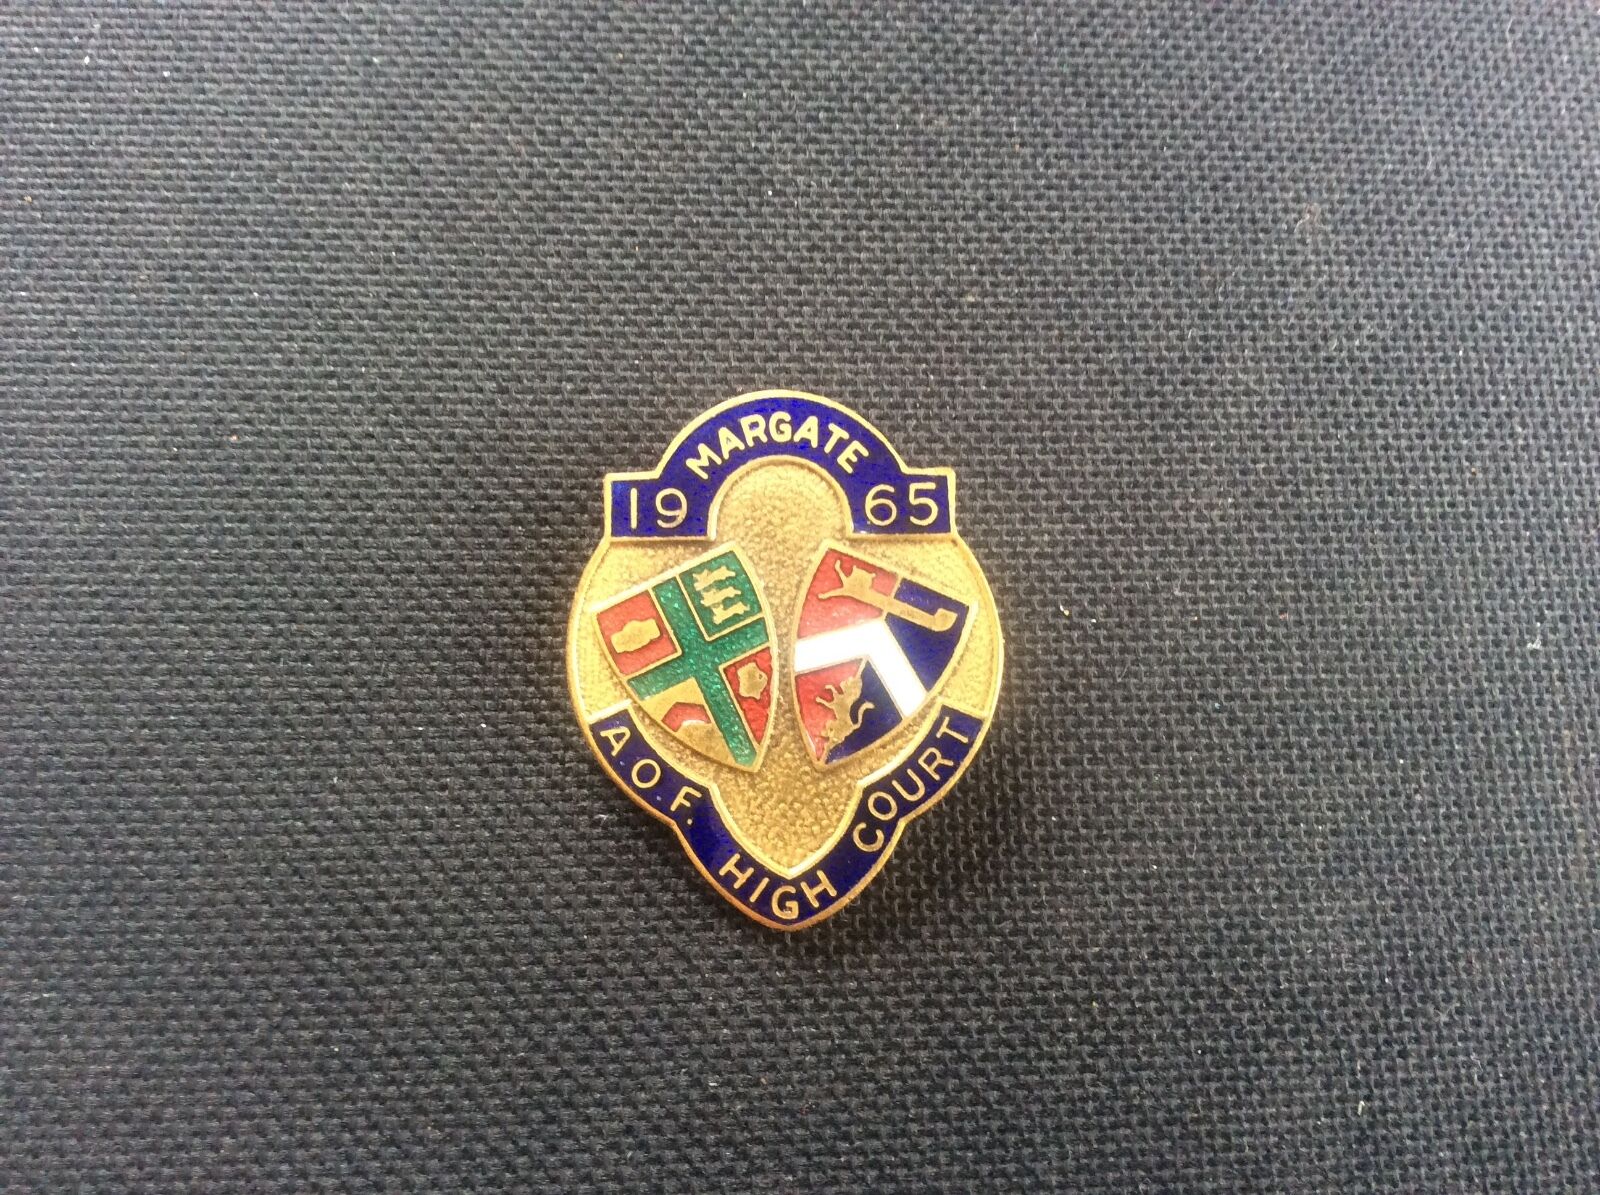 1965 AOF Ancient Order of Foresters Margate High Court Enamel Badge VGC 1960s